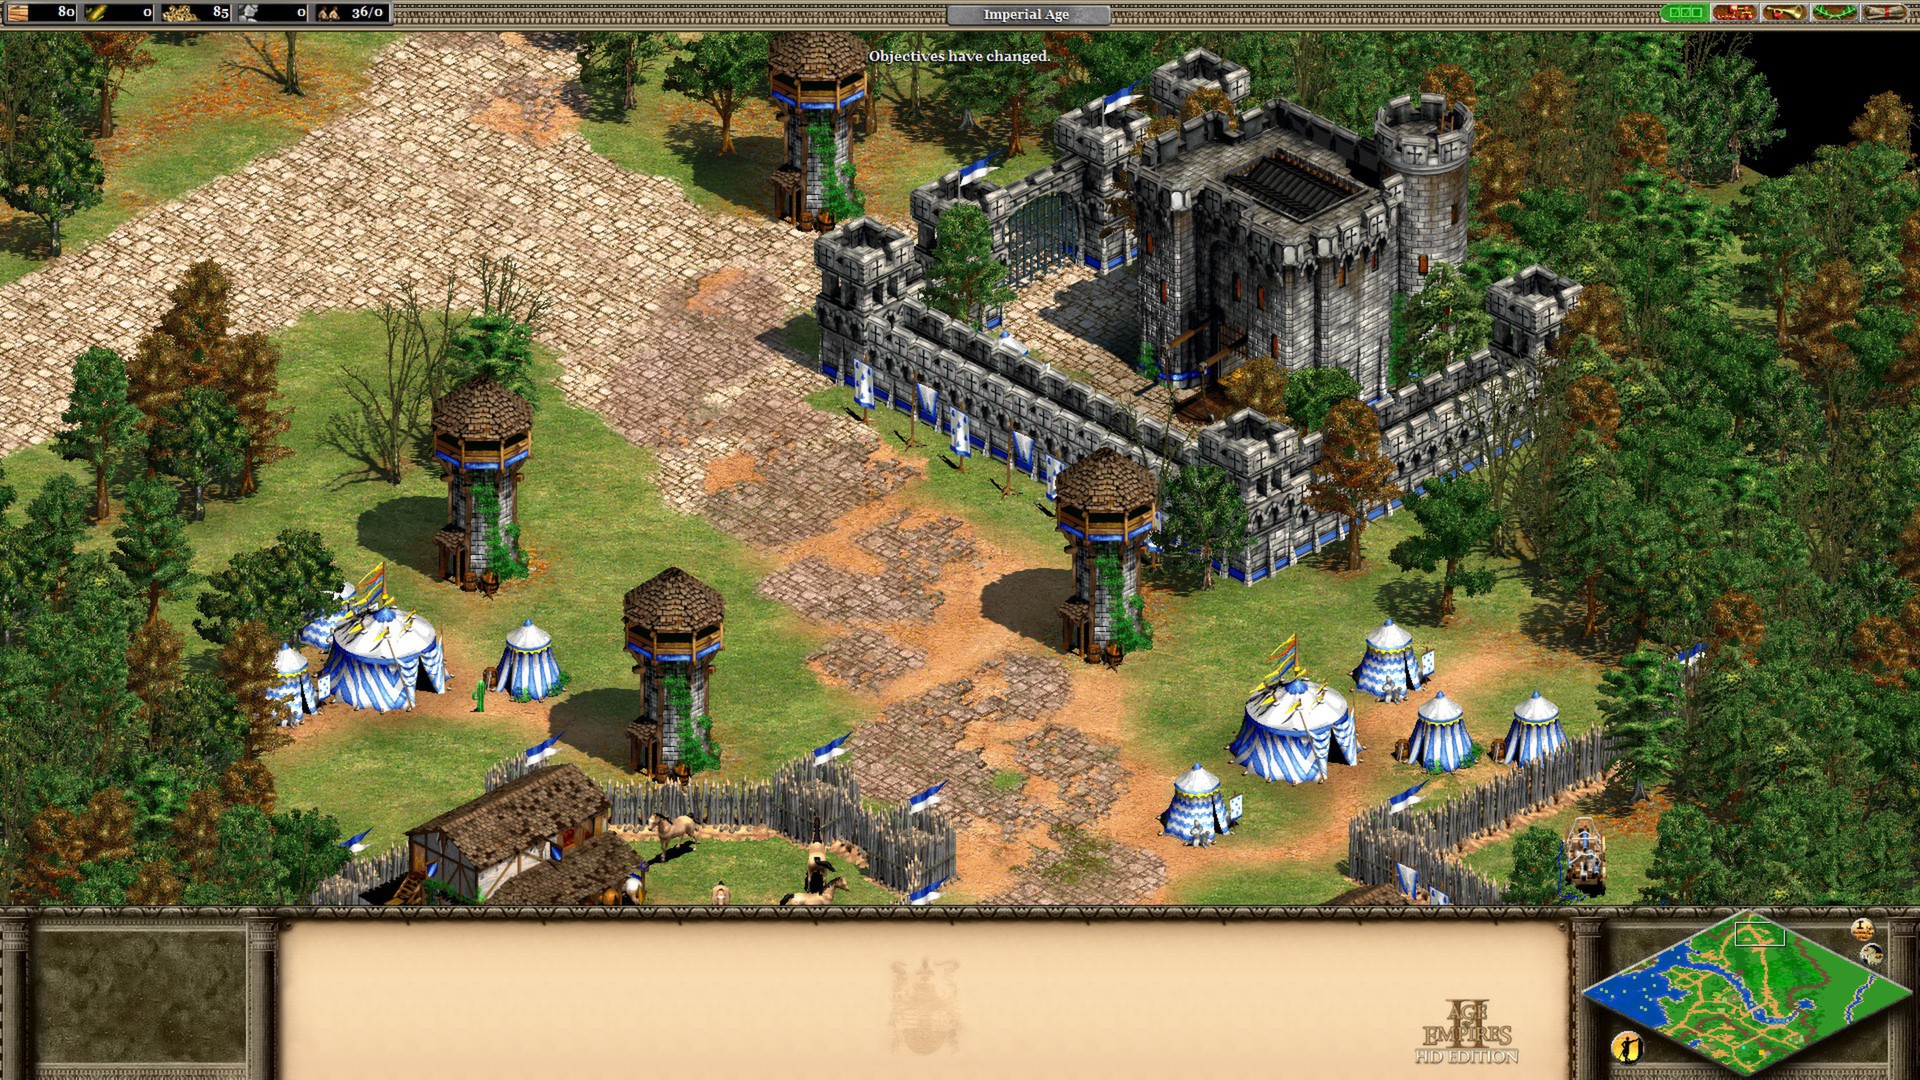 steam for mac age of empires